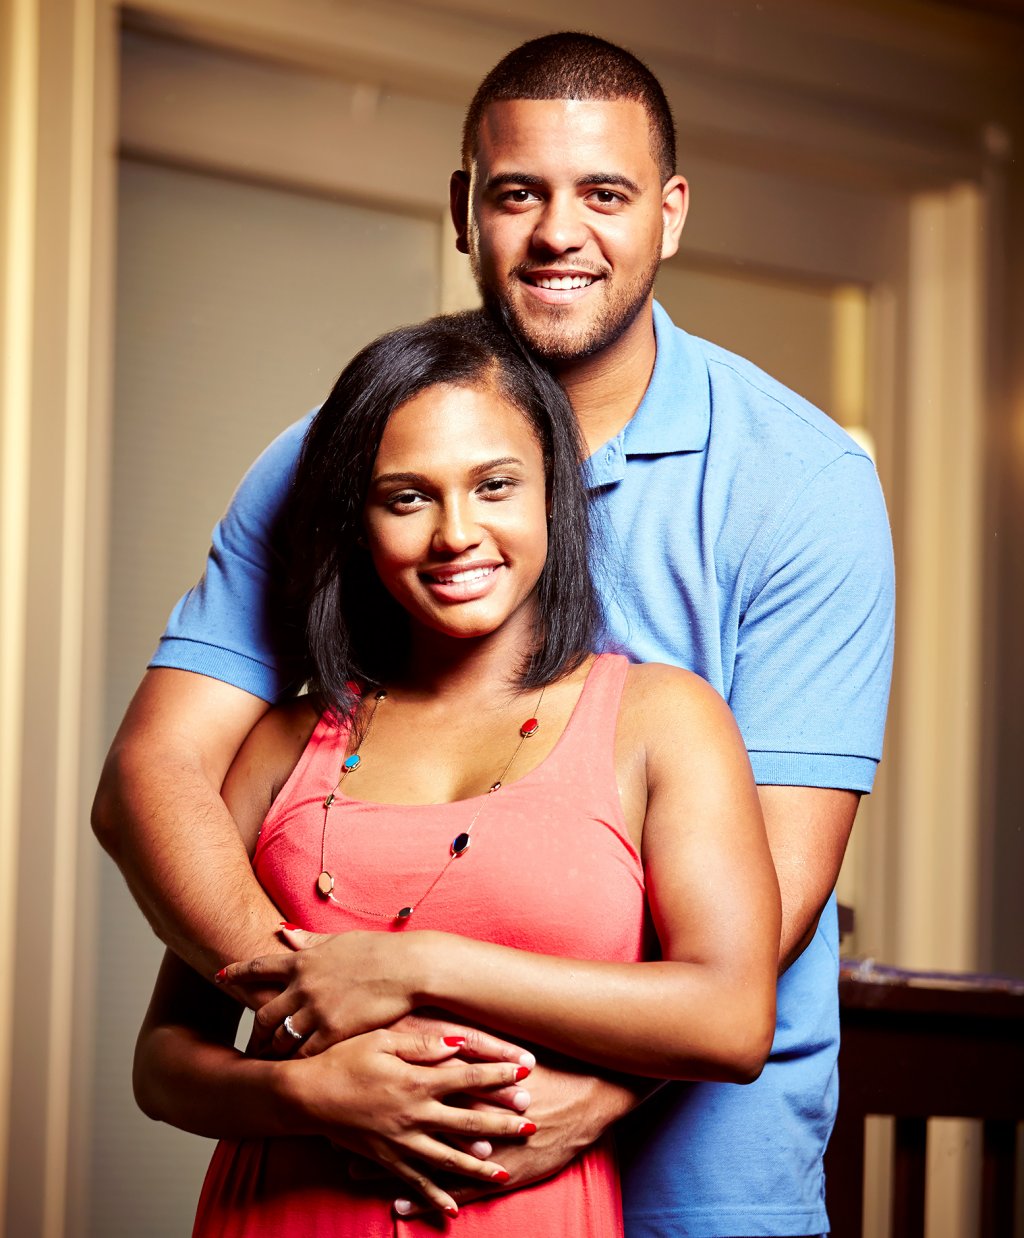 Married at first sight second chances vanessa